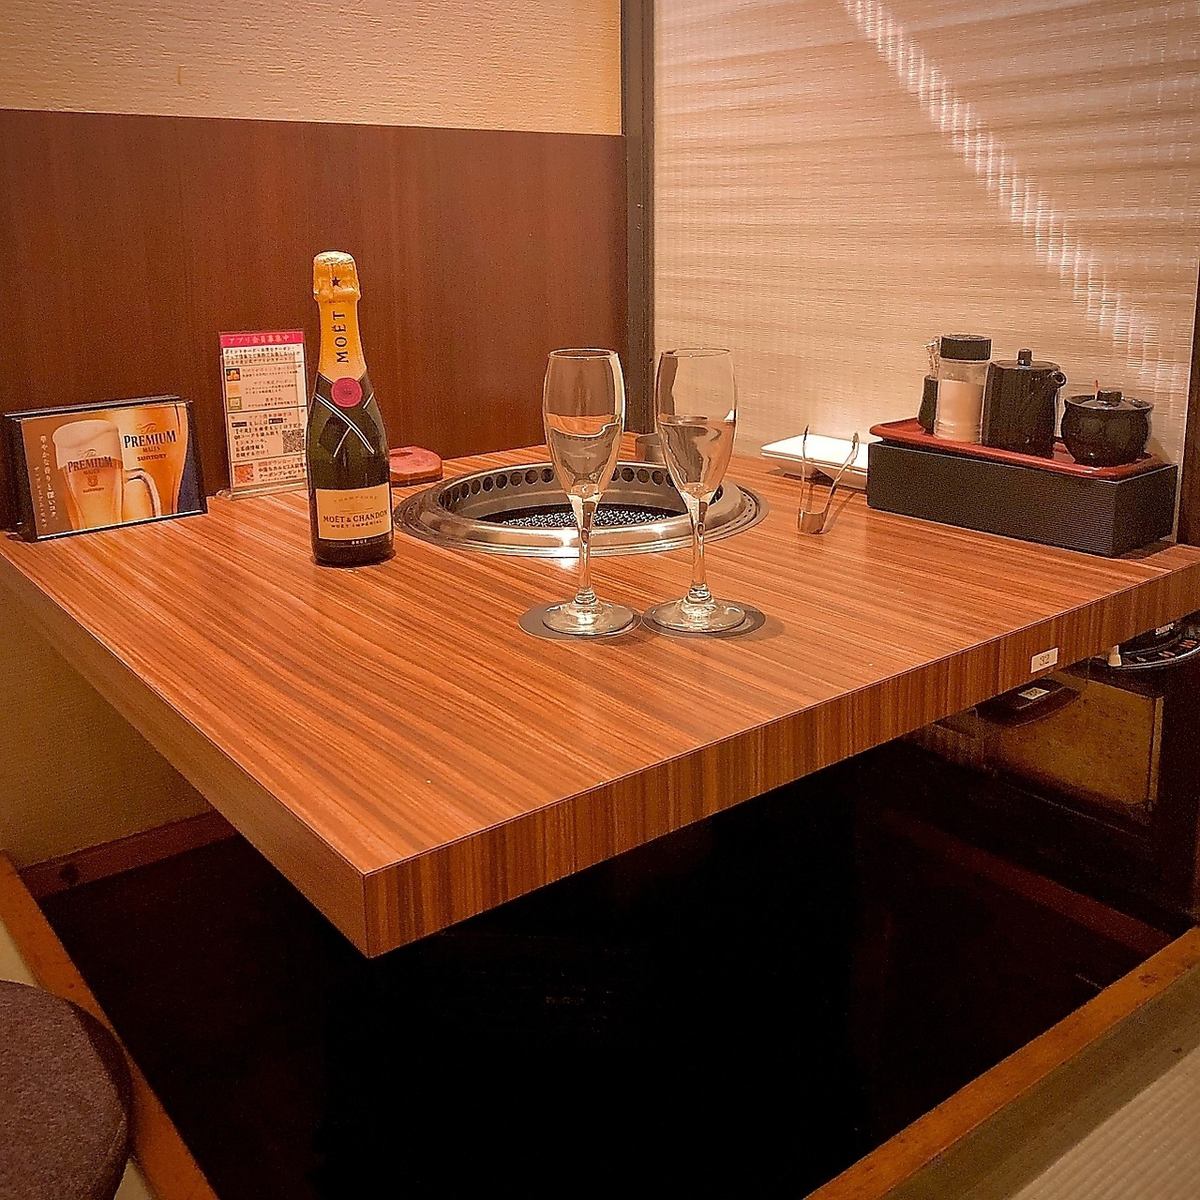 Fully equipped with private rooms that can be used by 2 people or more!